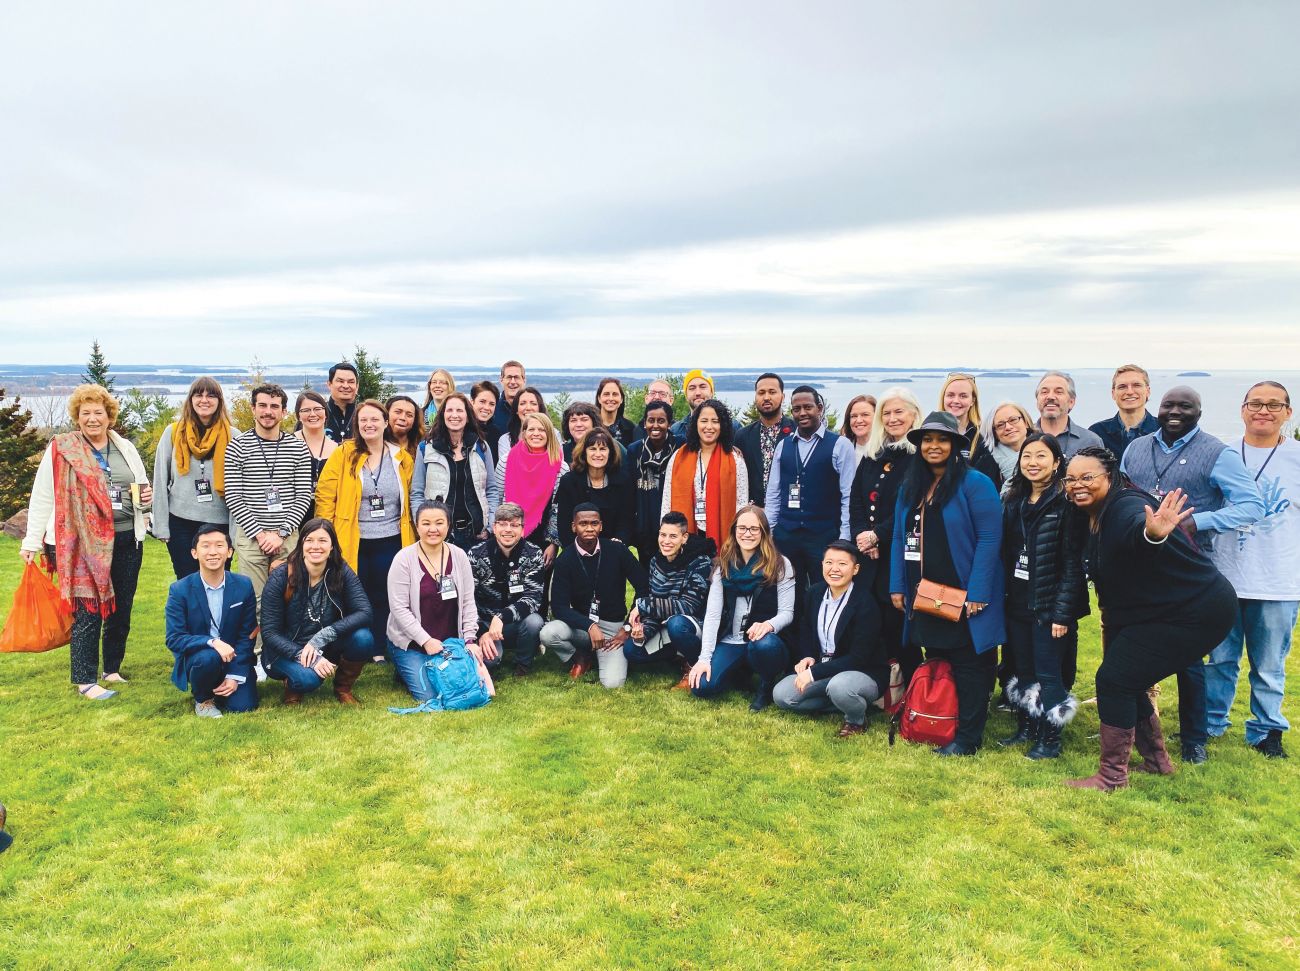 Fifty regional leaders attended PopTech at Point Lookout in Northport, Maine.